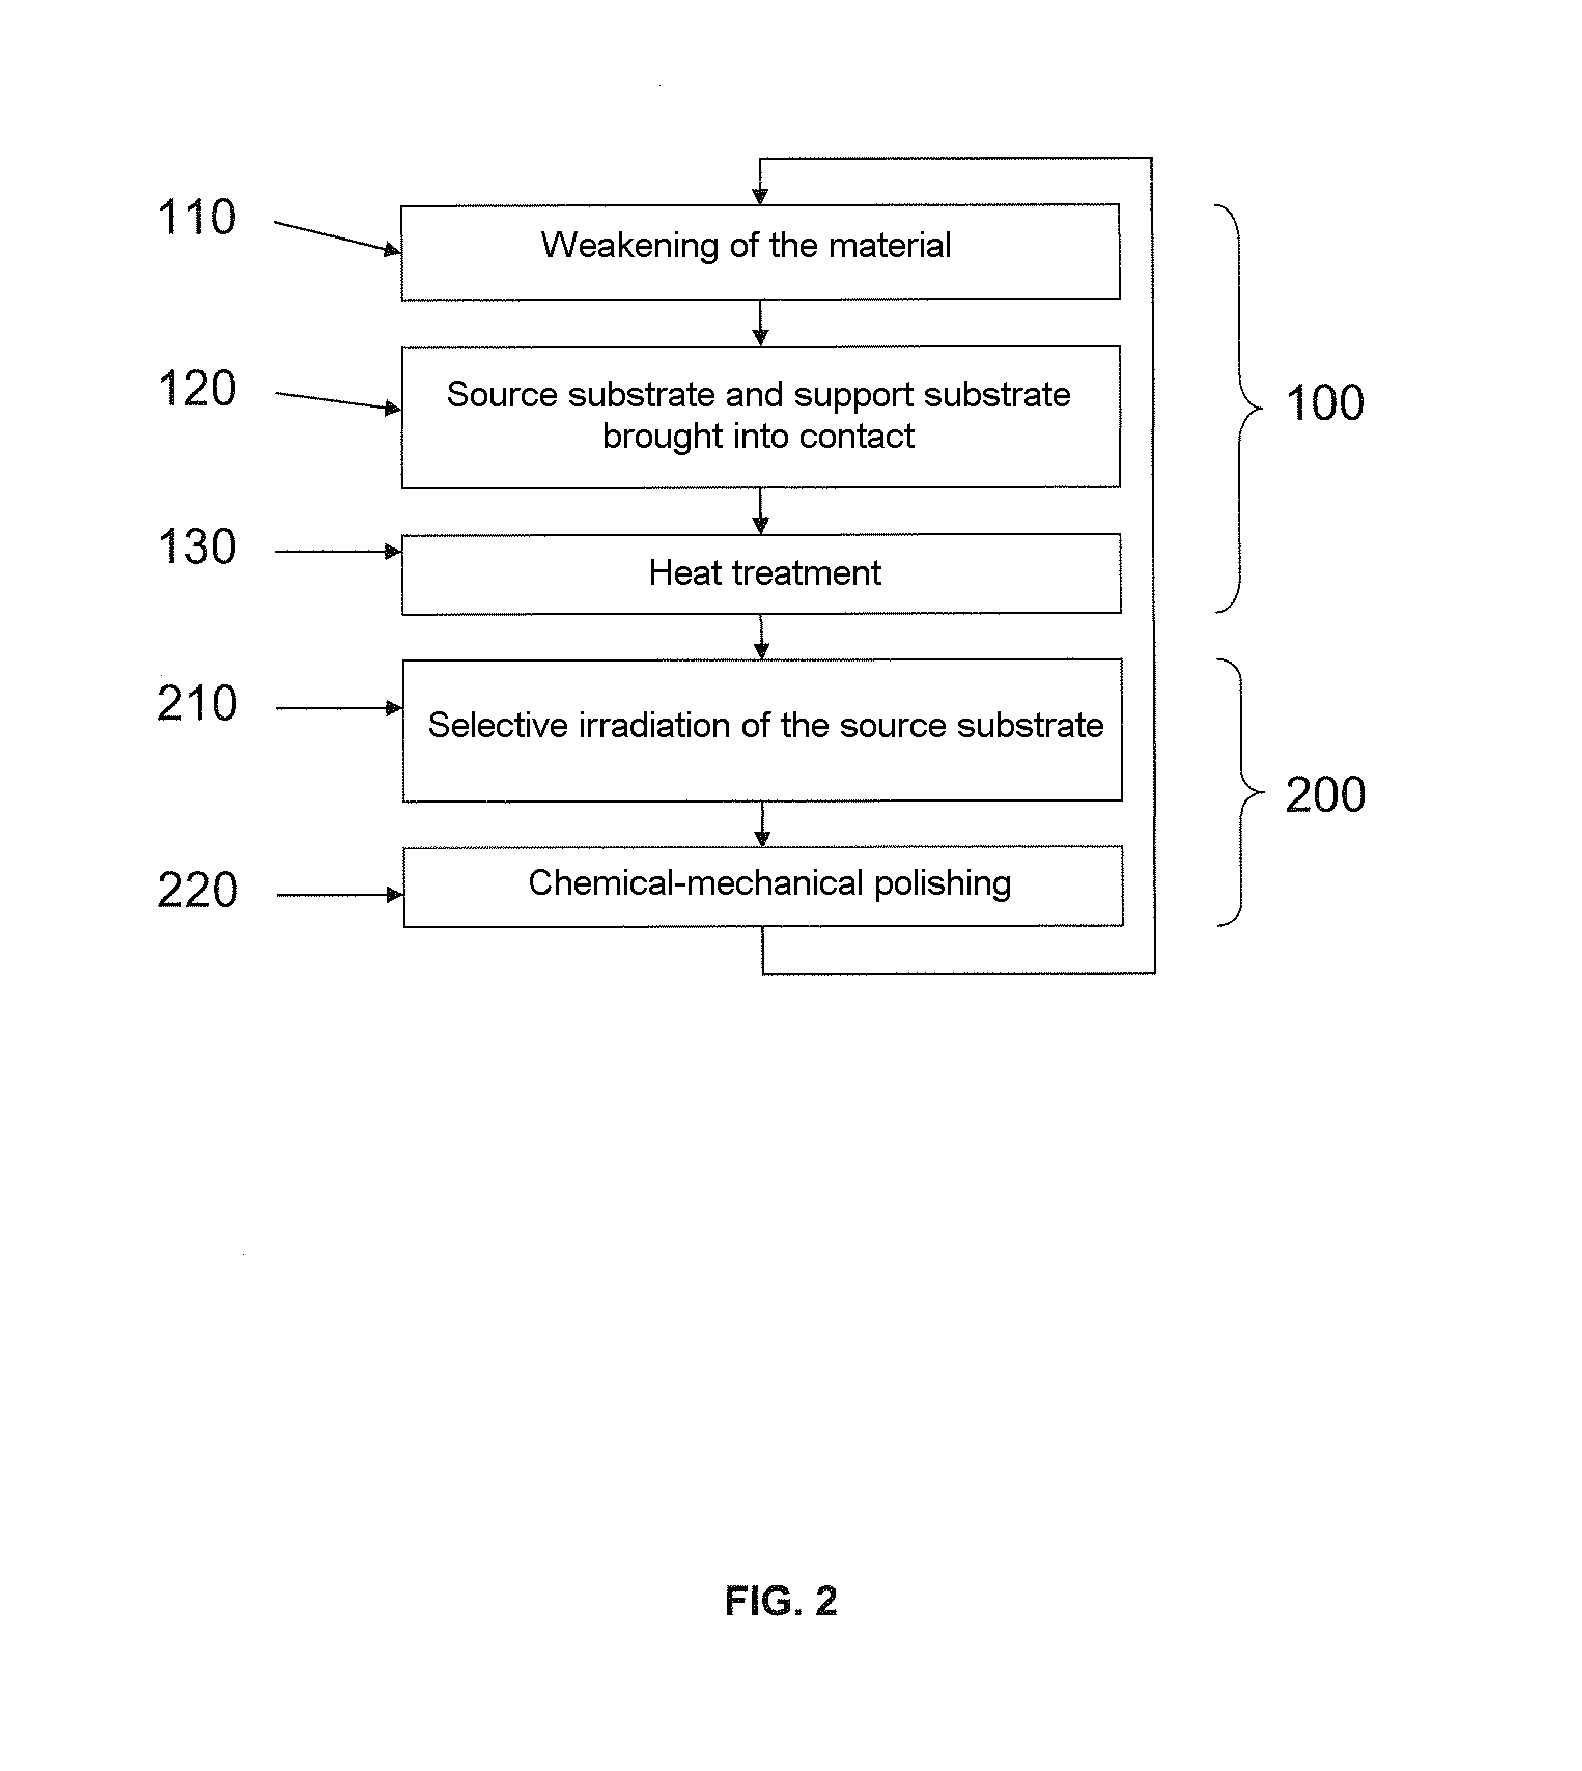 Method for recycling a source substrate